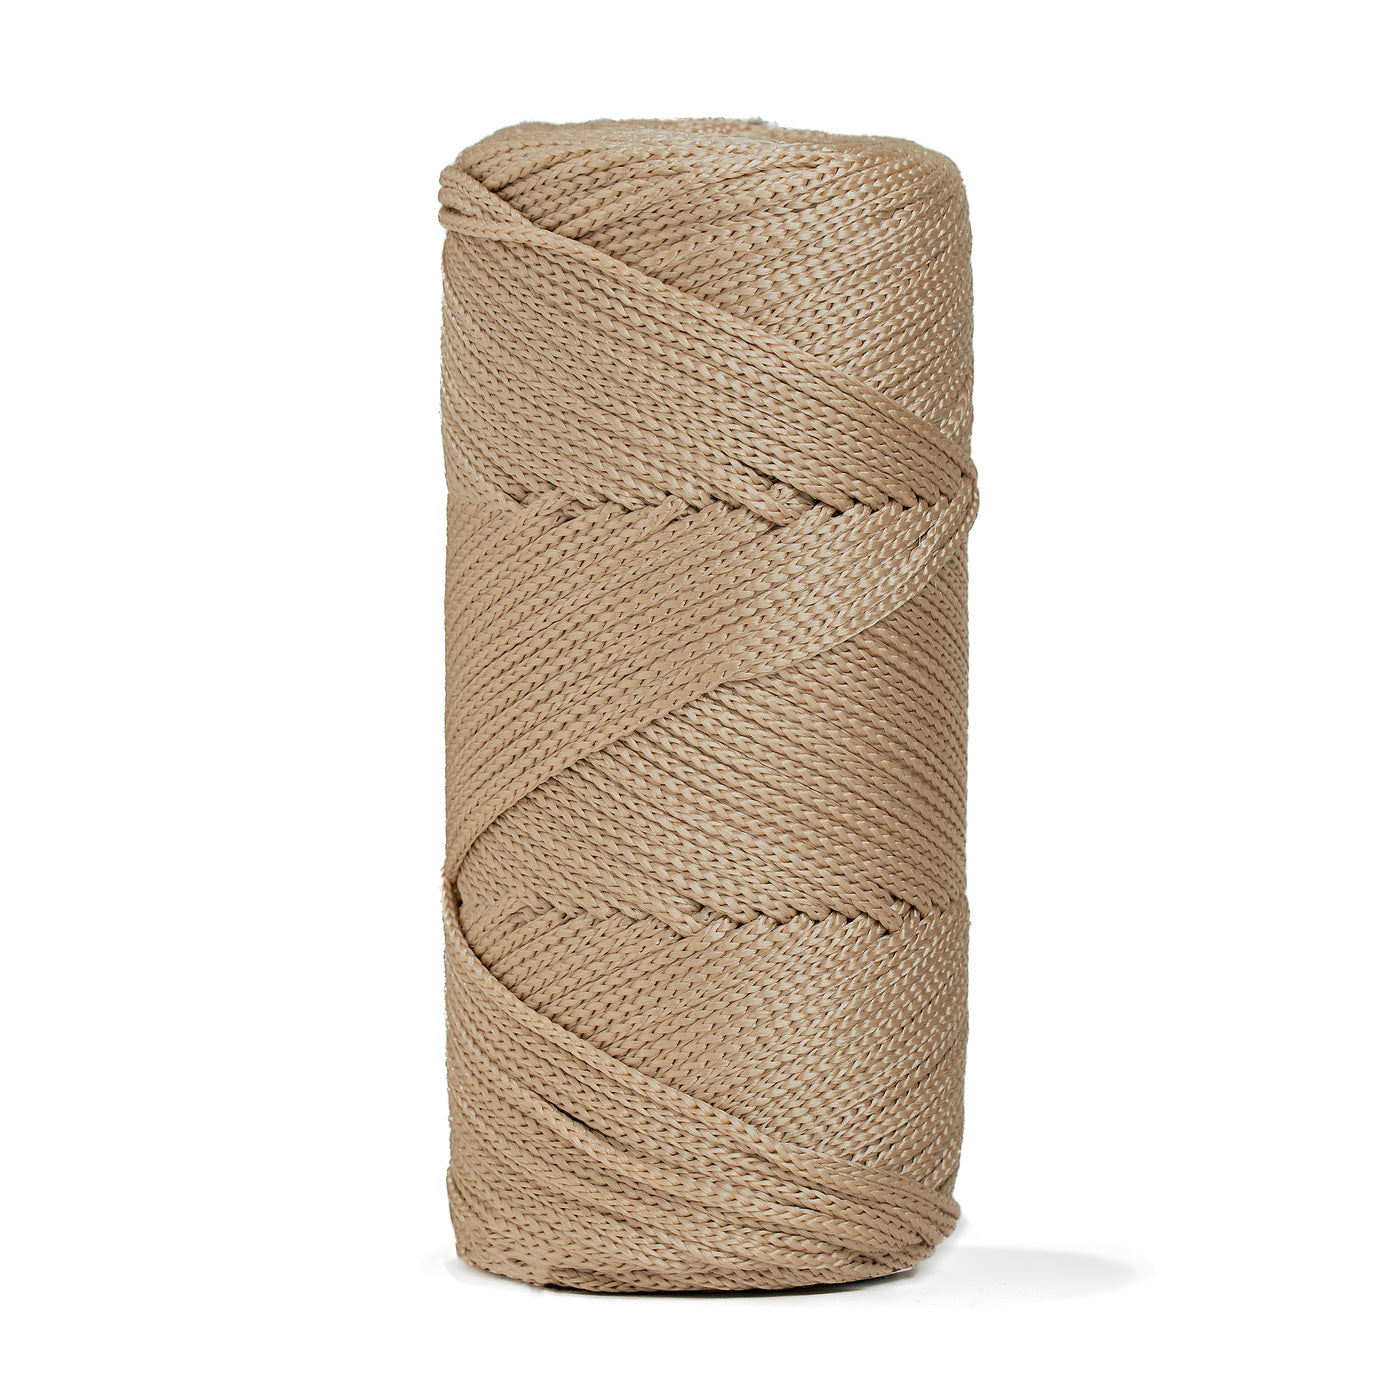 Outdoor 3 mm Macrame Braided Cord – Khaki Color